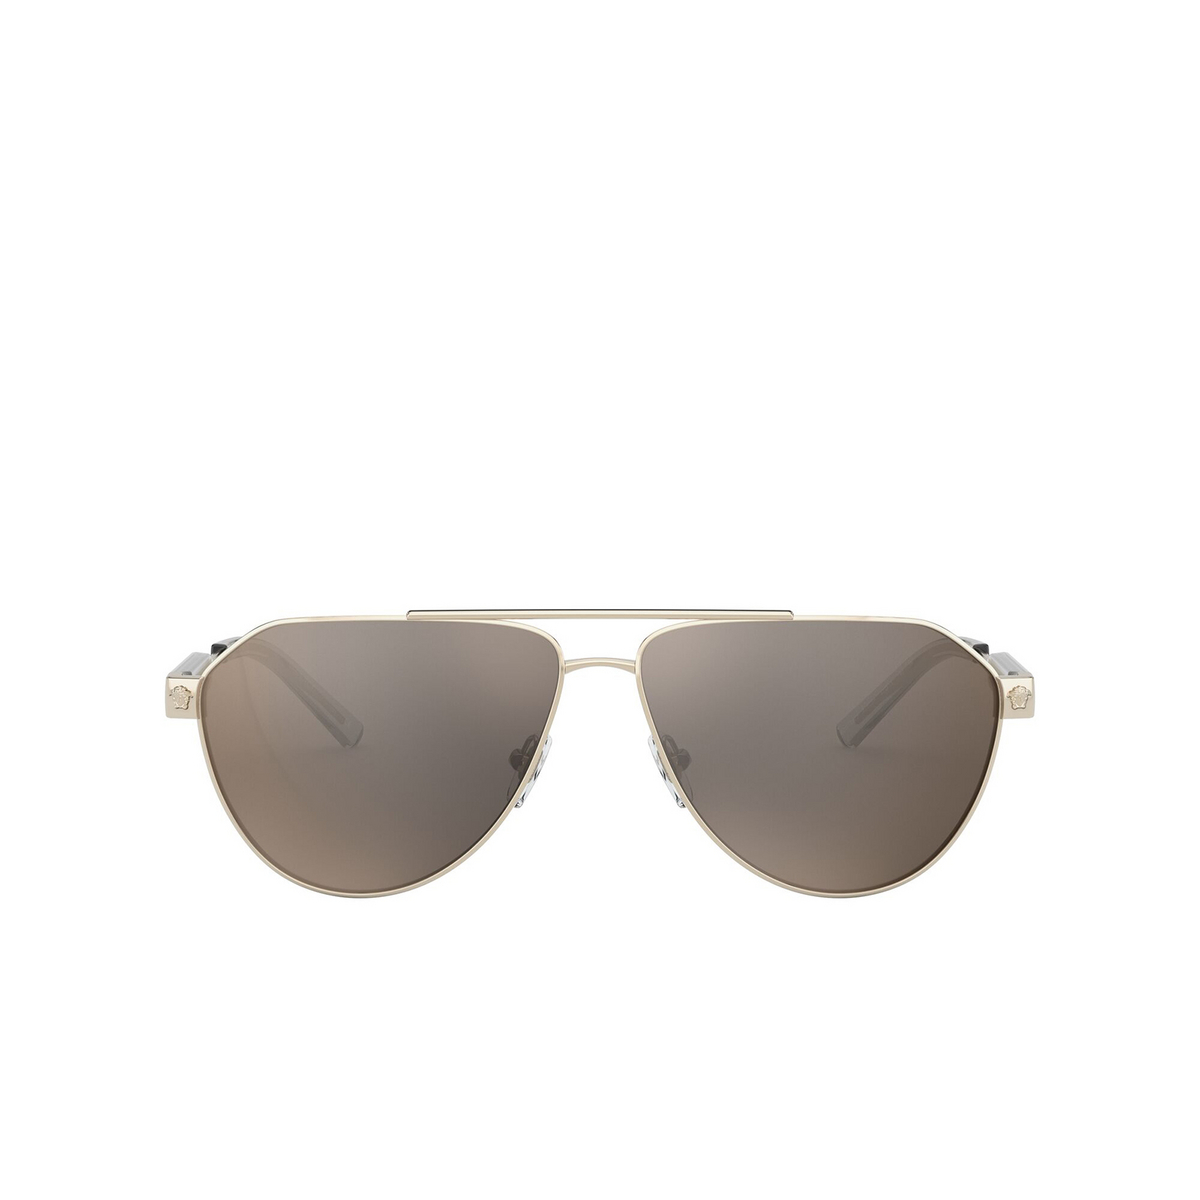 Versace® Aviator Sunglasses: VE2223 color Gold 10025A - front view.